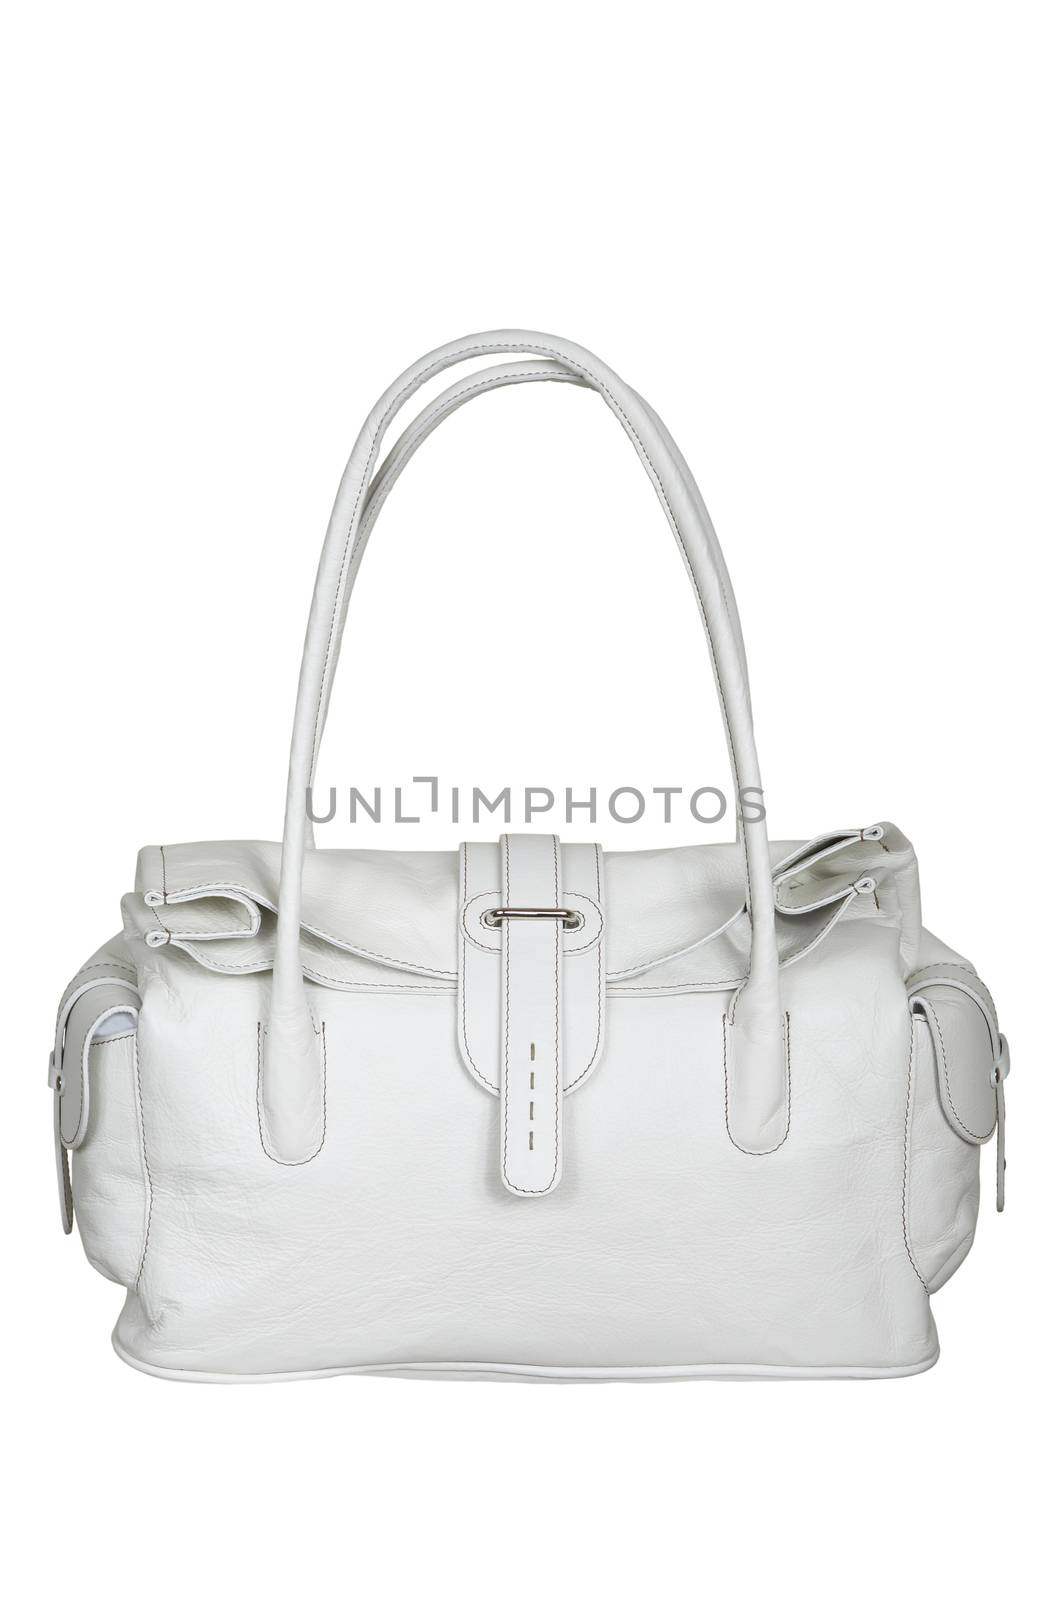 Leather white bag by terex